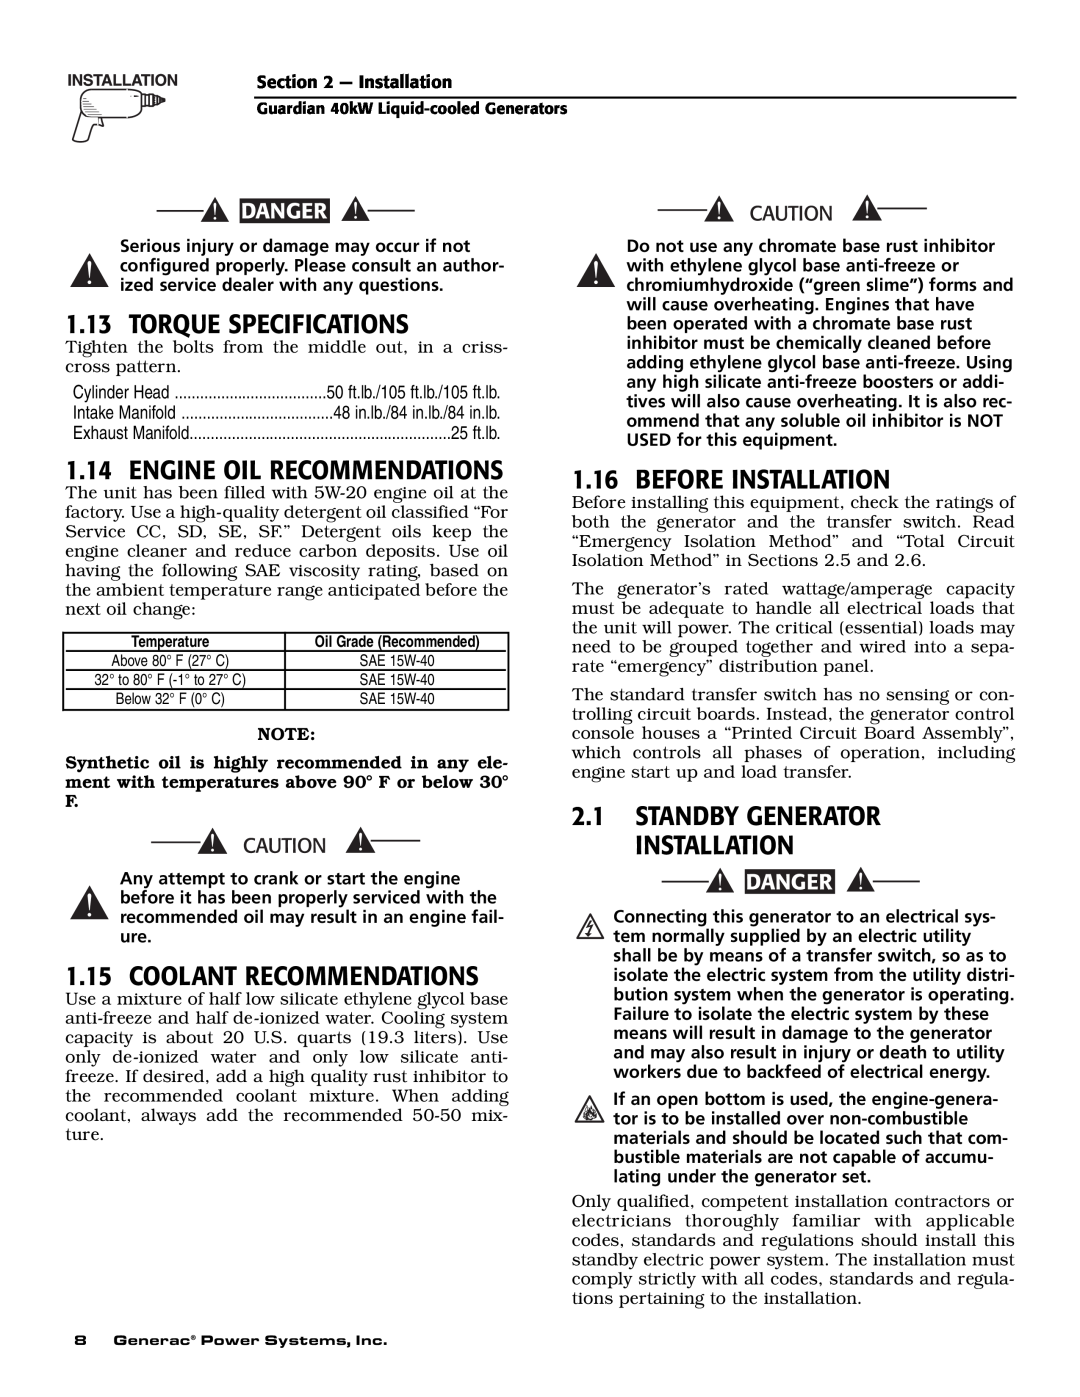 Generac Power Systems 004992-0, 004992-1 Torque Specifications, Engine Oil Recommendations, Coolant Recommendations 